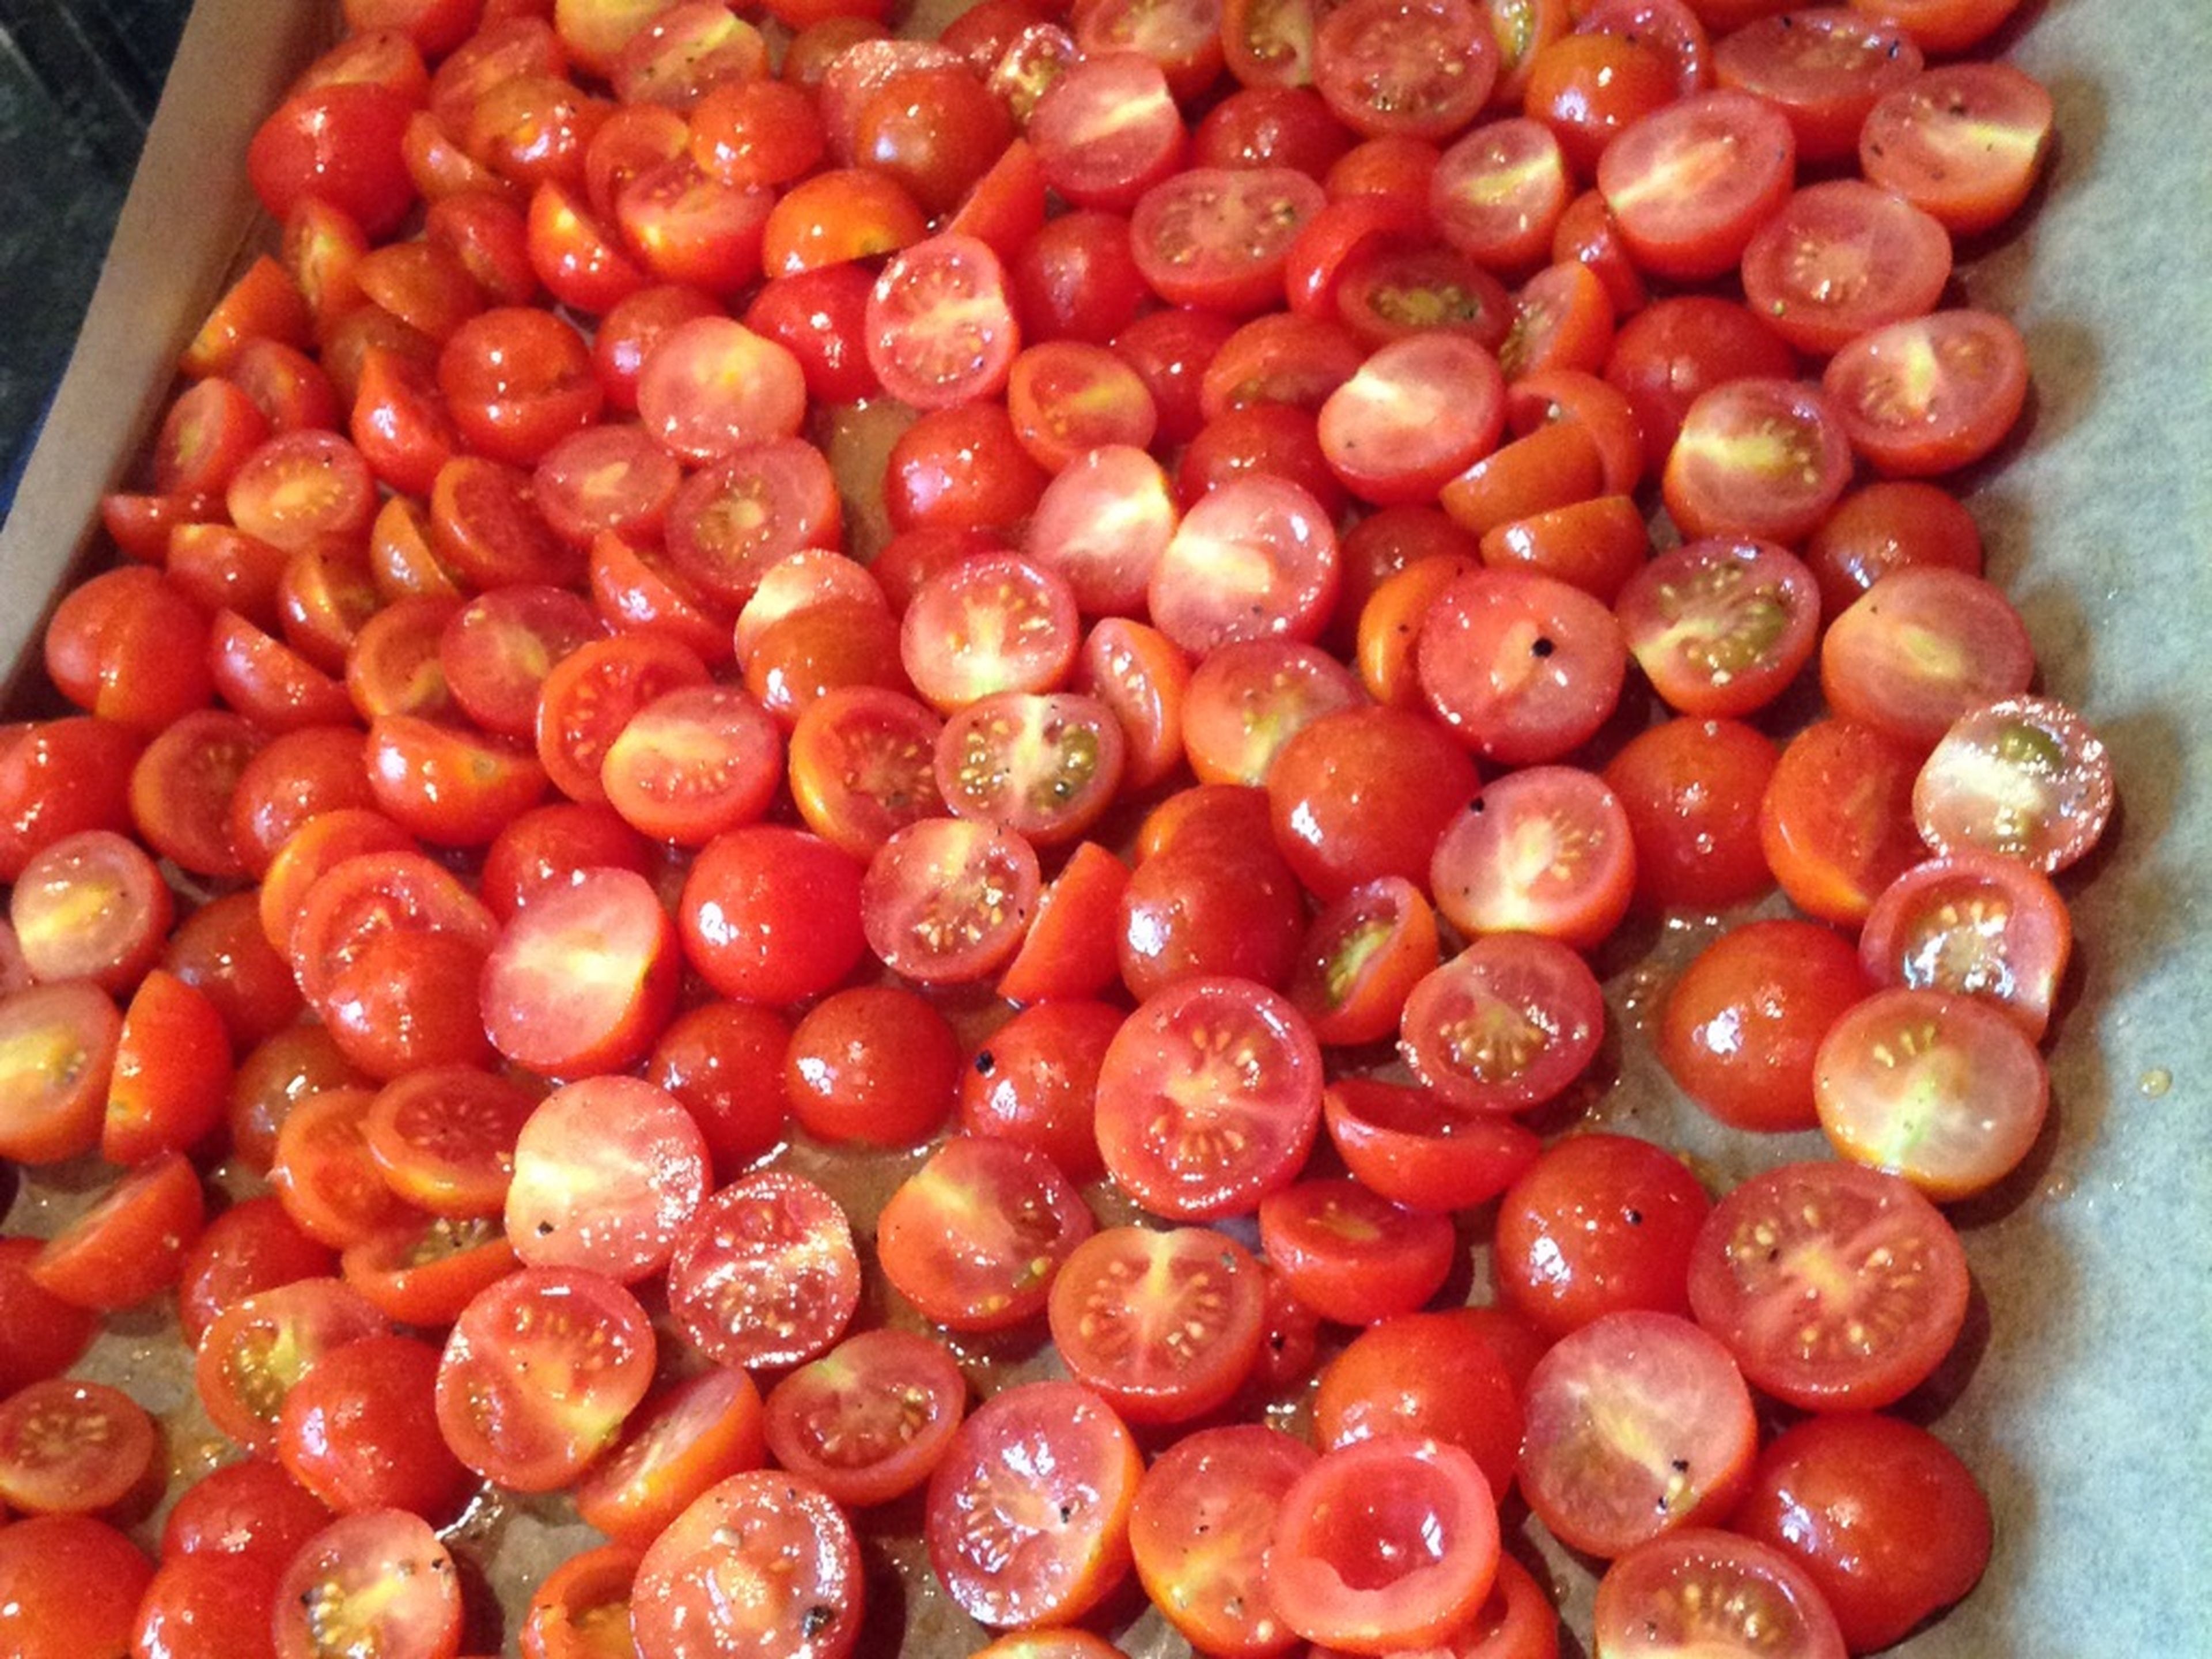 Spread tomatoes onto a parchment-lined baking sheet, making sure that most are skin-side down. Season with salt and pepper and bake in the oven at 170°C/340°F for approx. 30 – 35 min.